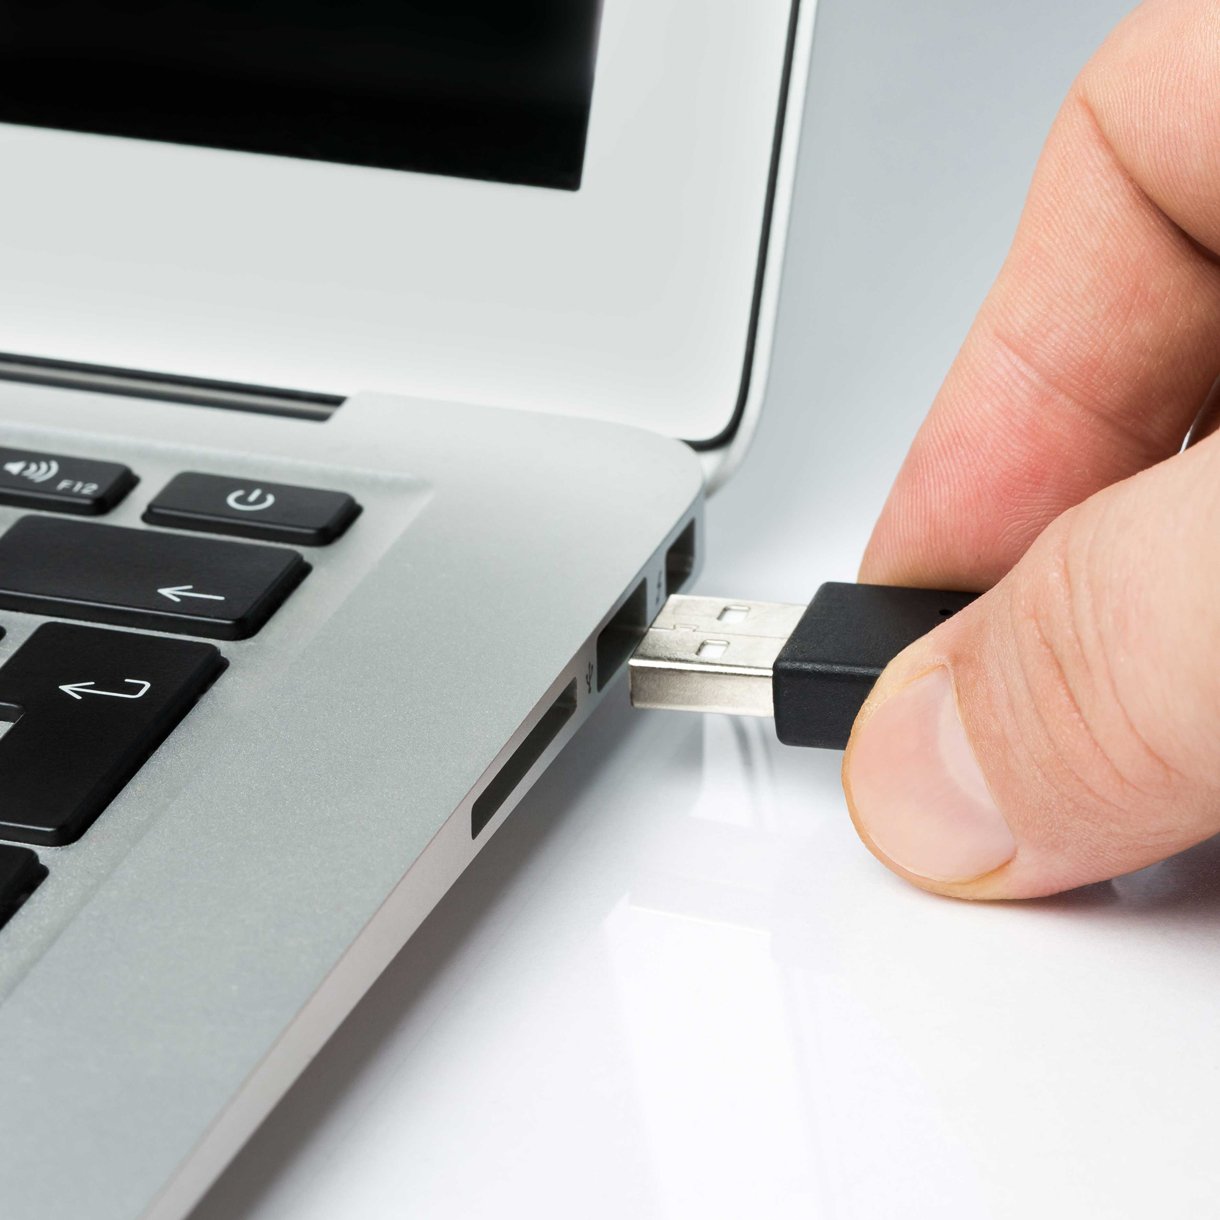 USB being plugged into notebook